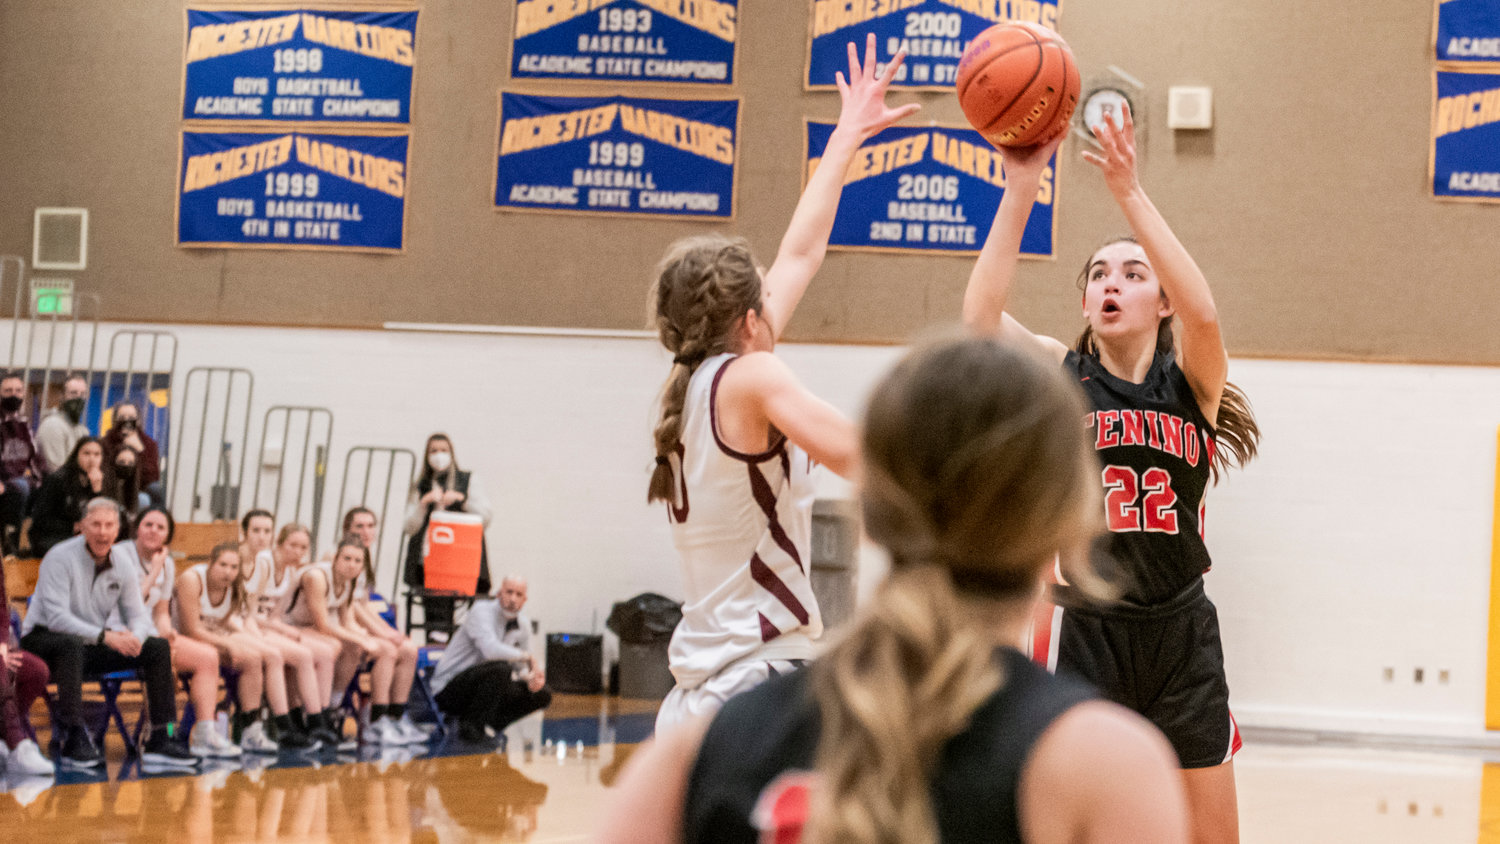 Tenino’s Ashley Schow (22) looks to shoot over a Montesano defender during a game Saturday in Rochester.